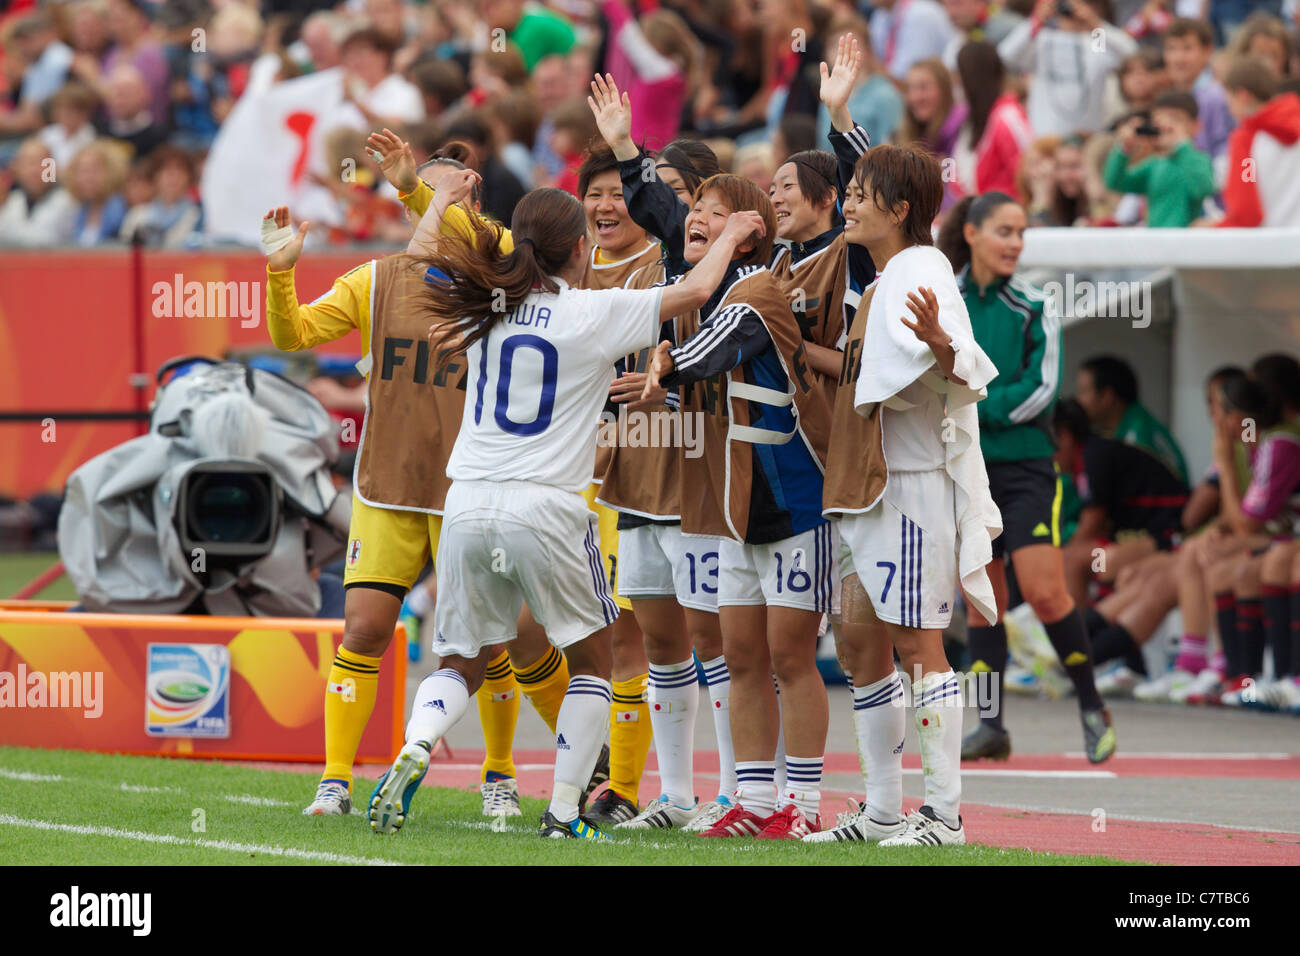 Homare Sawa of Japan (10) celebrates with teammates after scoring a goal against Mexico in a 2011 Women's World Cup soccer match Stock Photo